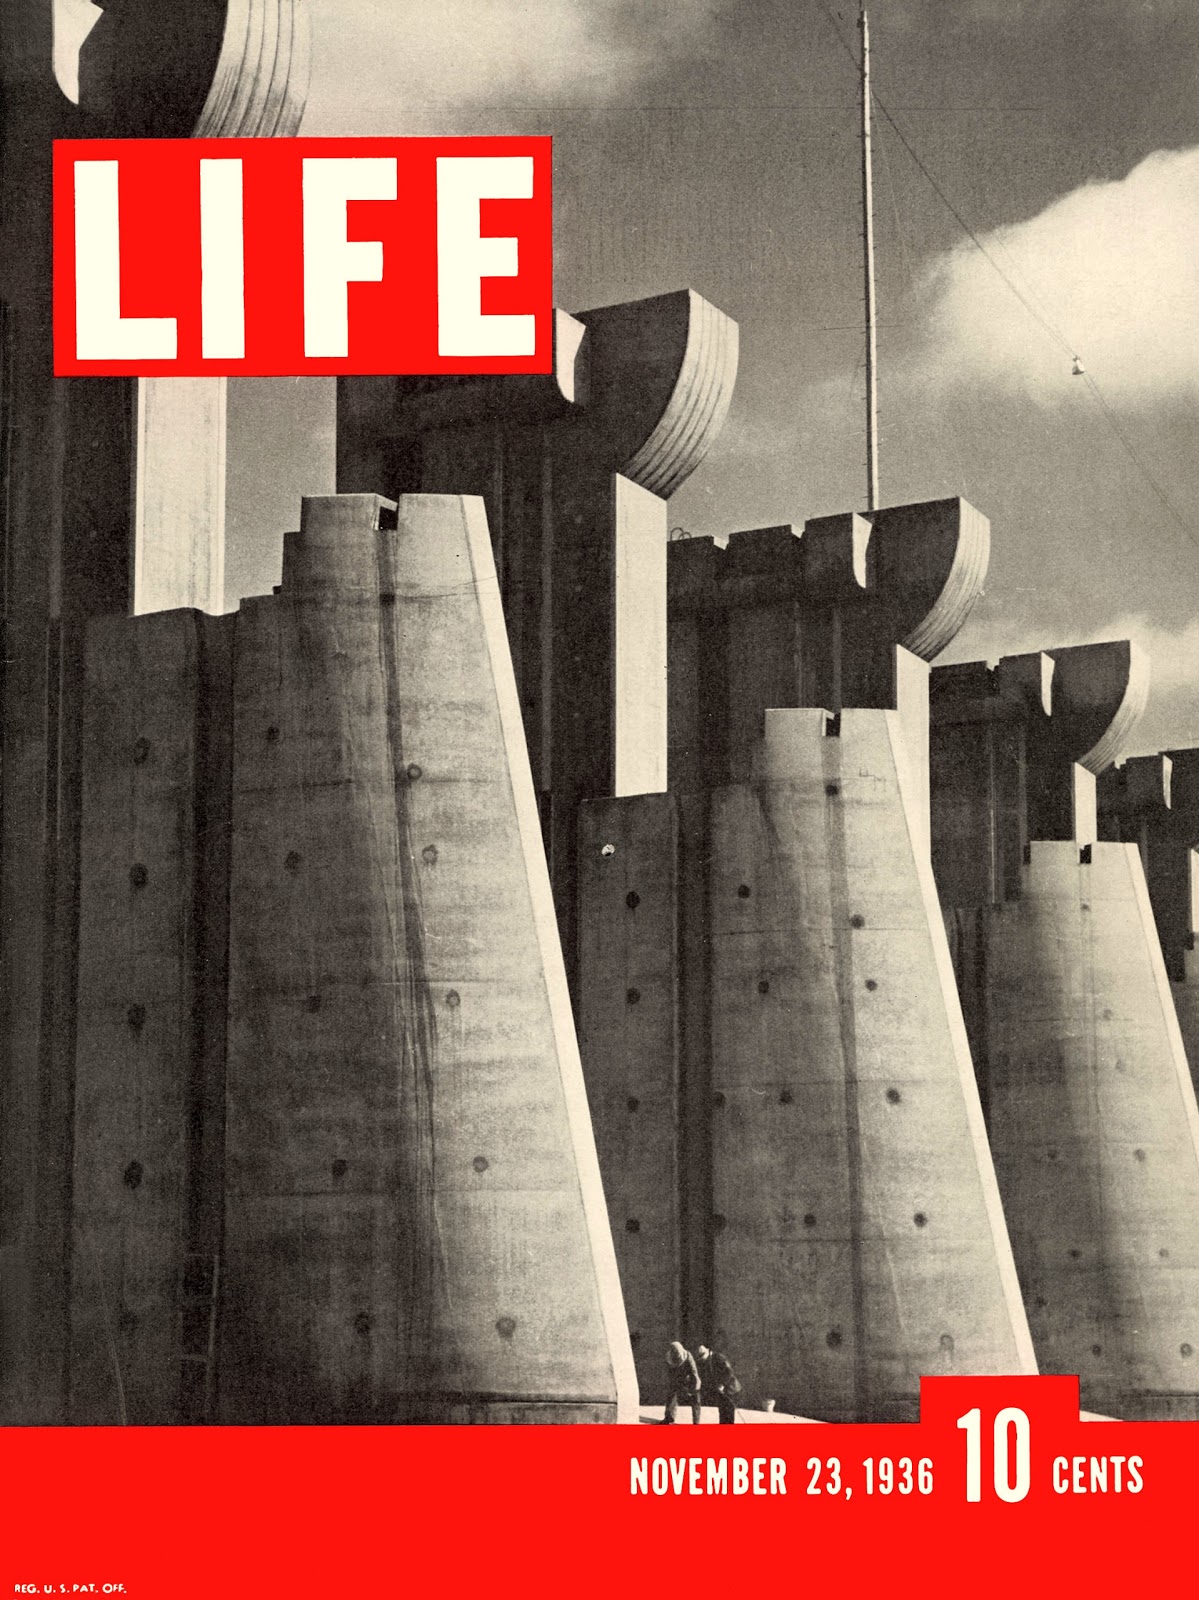 LIFE Magazine first issue cover ~ vintage everyday